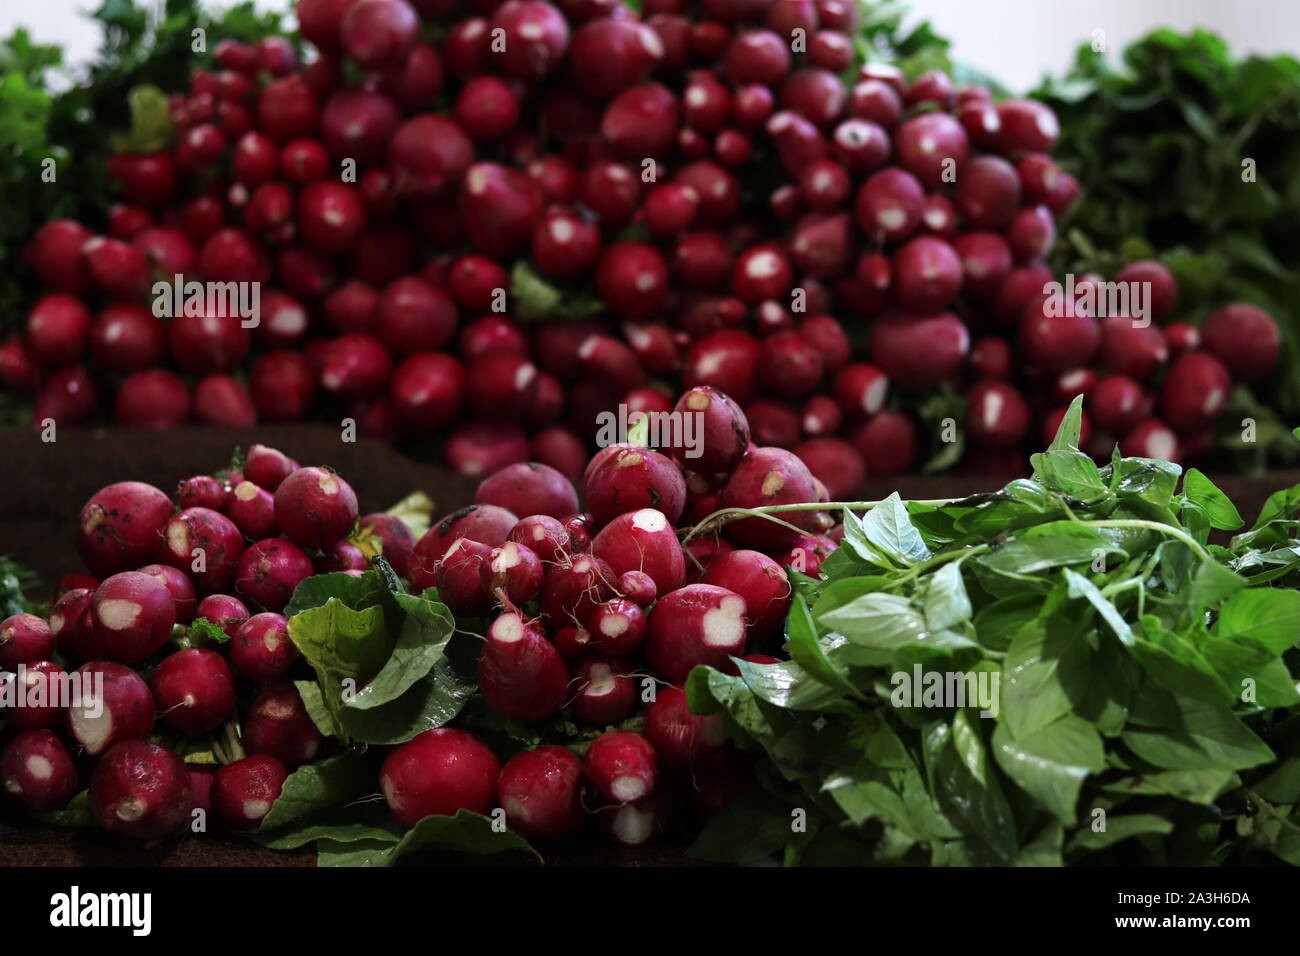 Radishes with green leaves on display in market Stock Photo